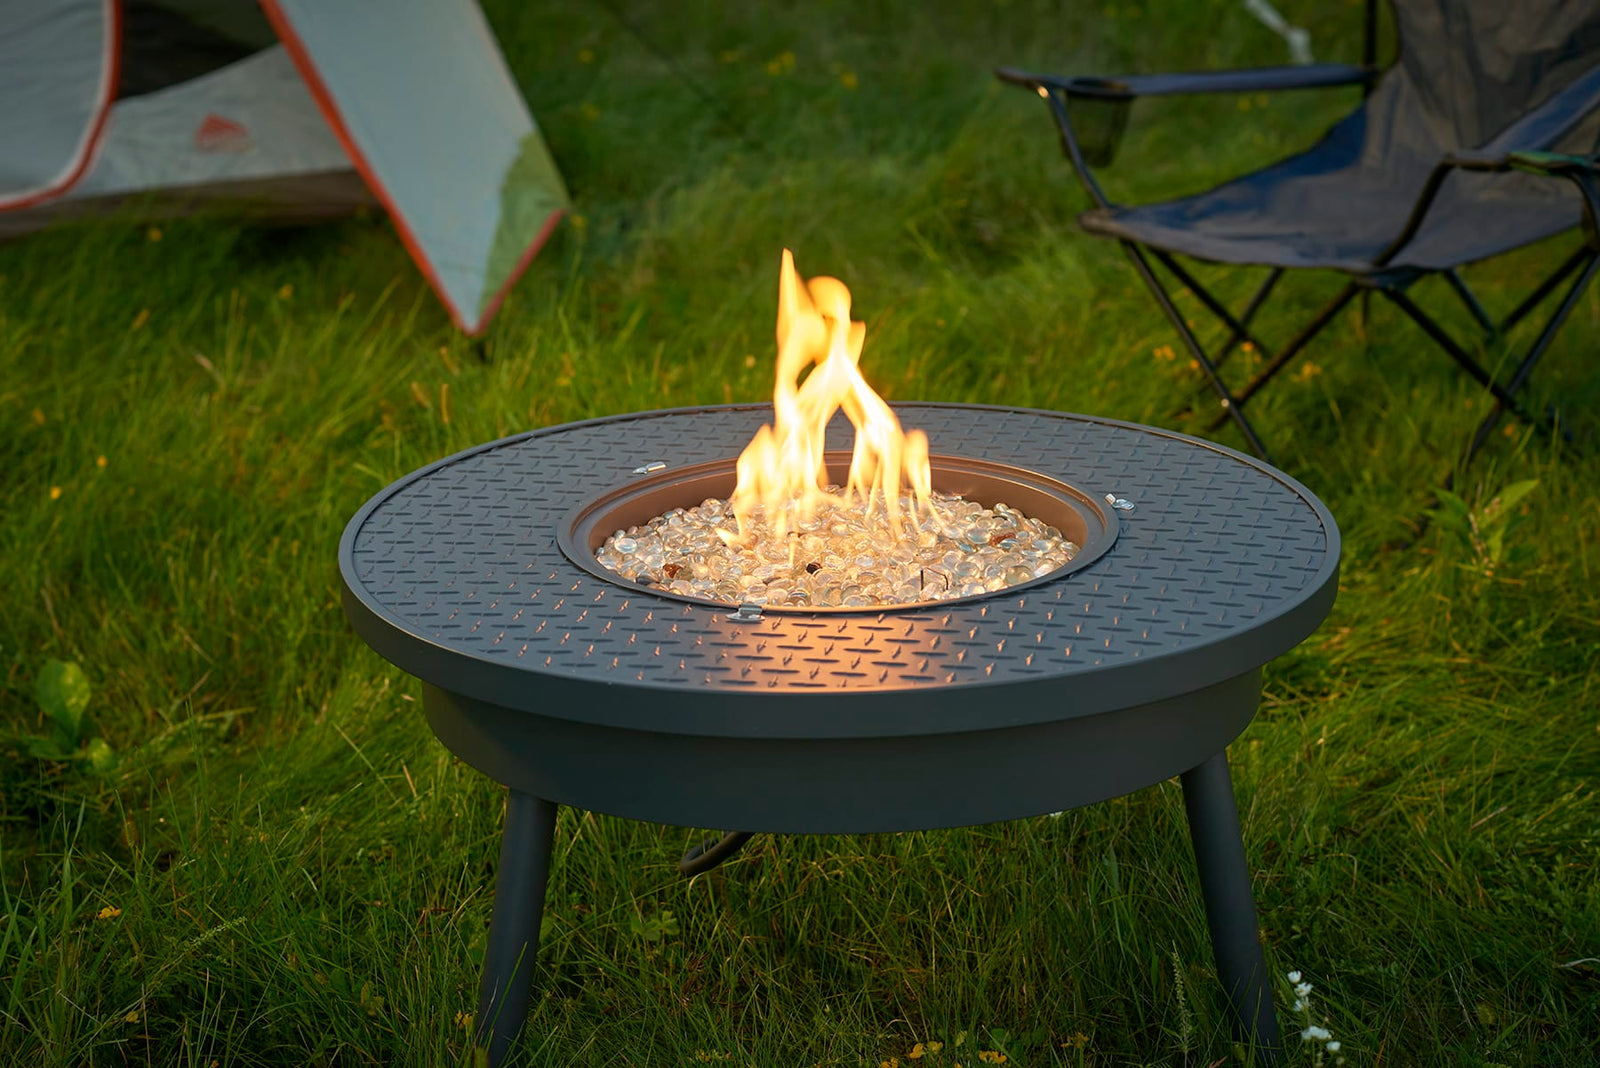 New Portable Gas Fire Pit from The Outdoor GreatRoom Company